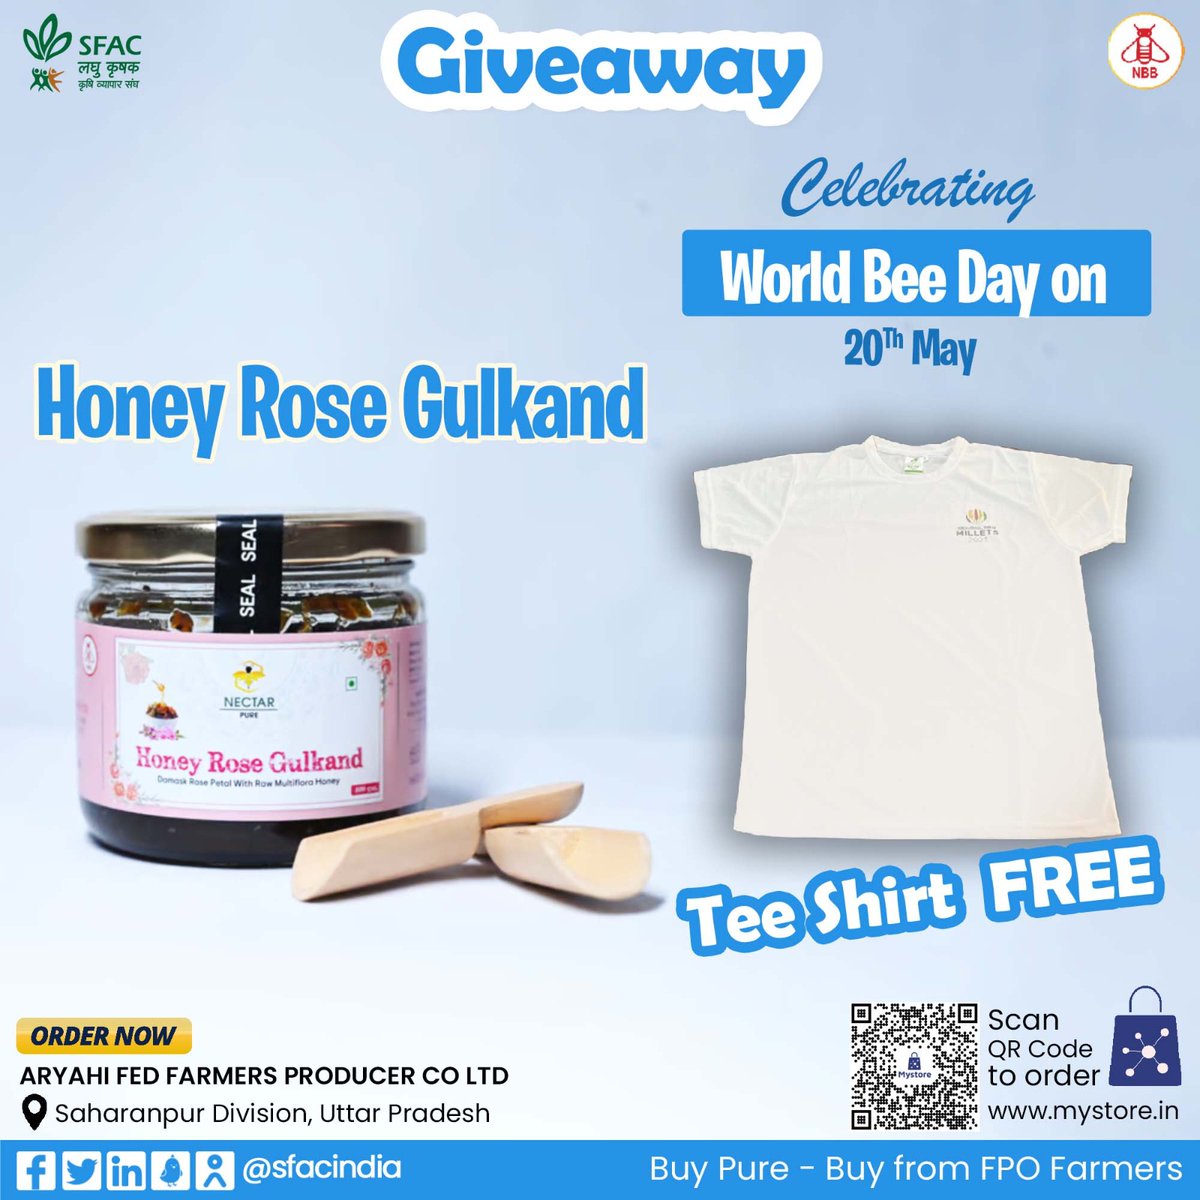 Giveaway on World Bee Day 20th May Enjoy natural blood purifier & remedy for beautiful skin with this pure honey rose gulkand. WIN a white tee shirt FREE. Valid for first 5 orders Buy straight from FPO farmers👇 mystore.in/en/product/hon… 🍯 #VocalForLocal #healthychoices